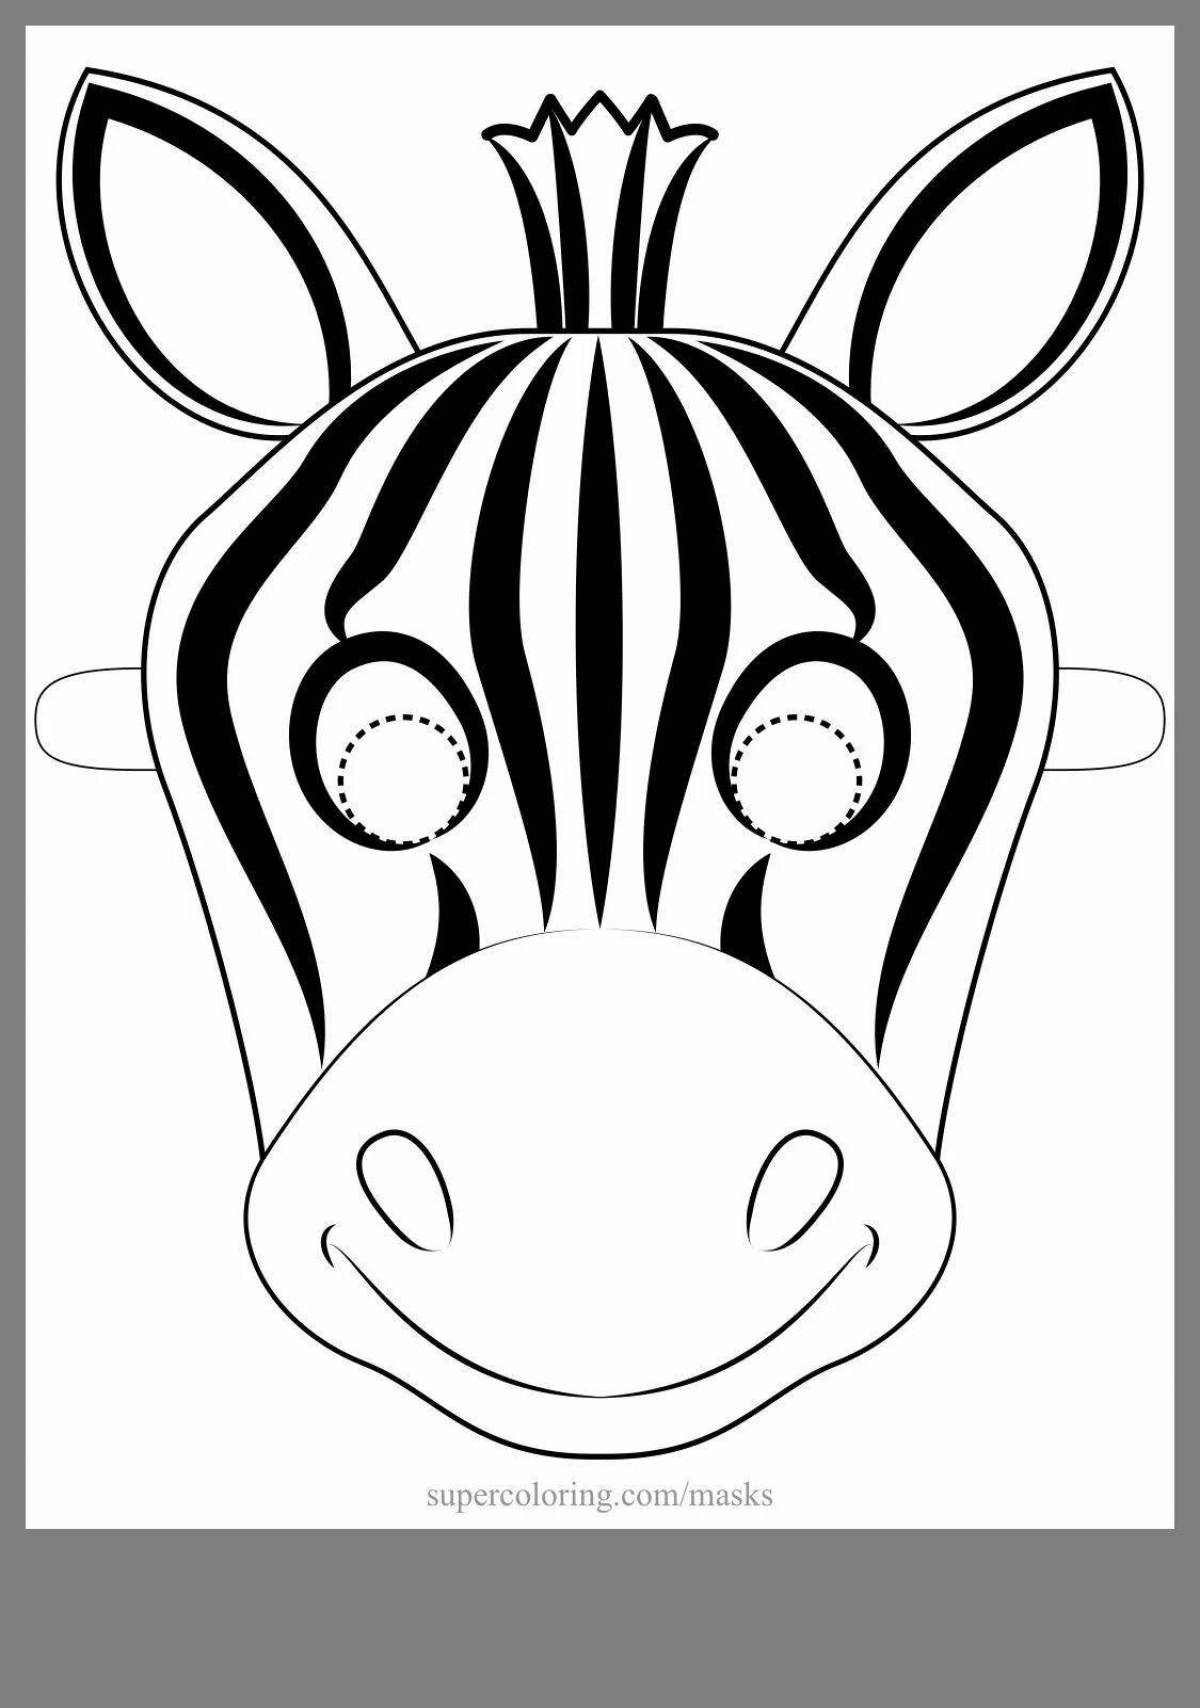 Colorful animal masks coloring pages for kids